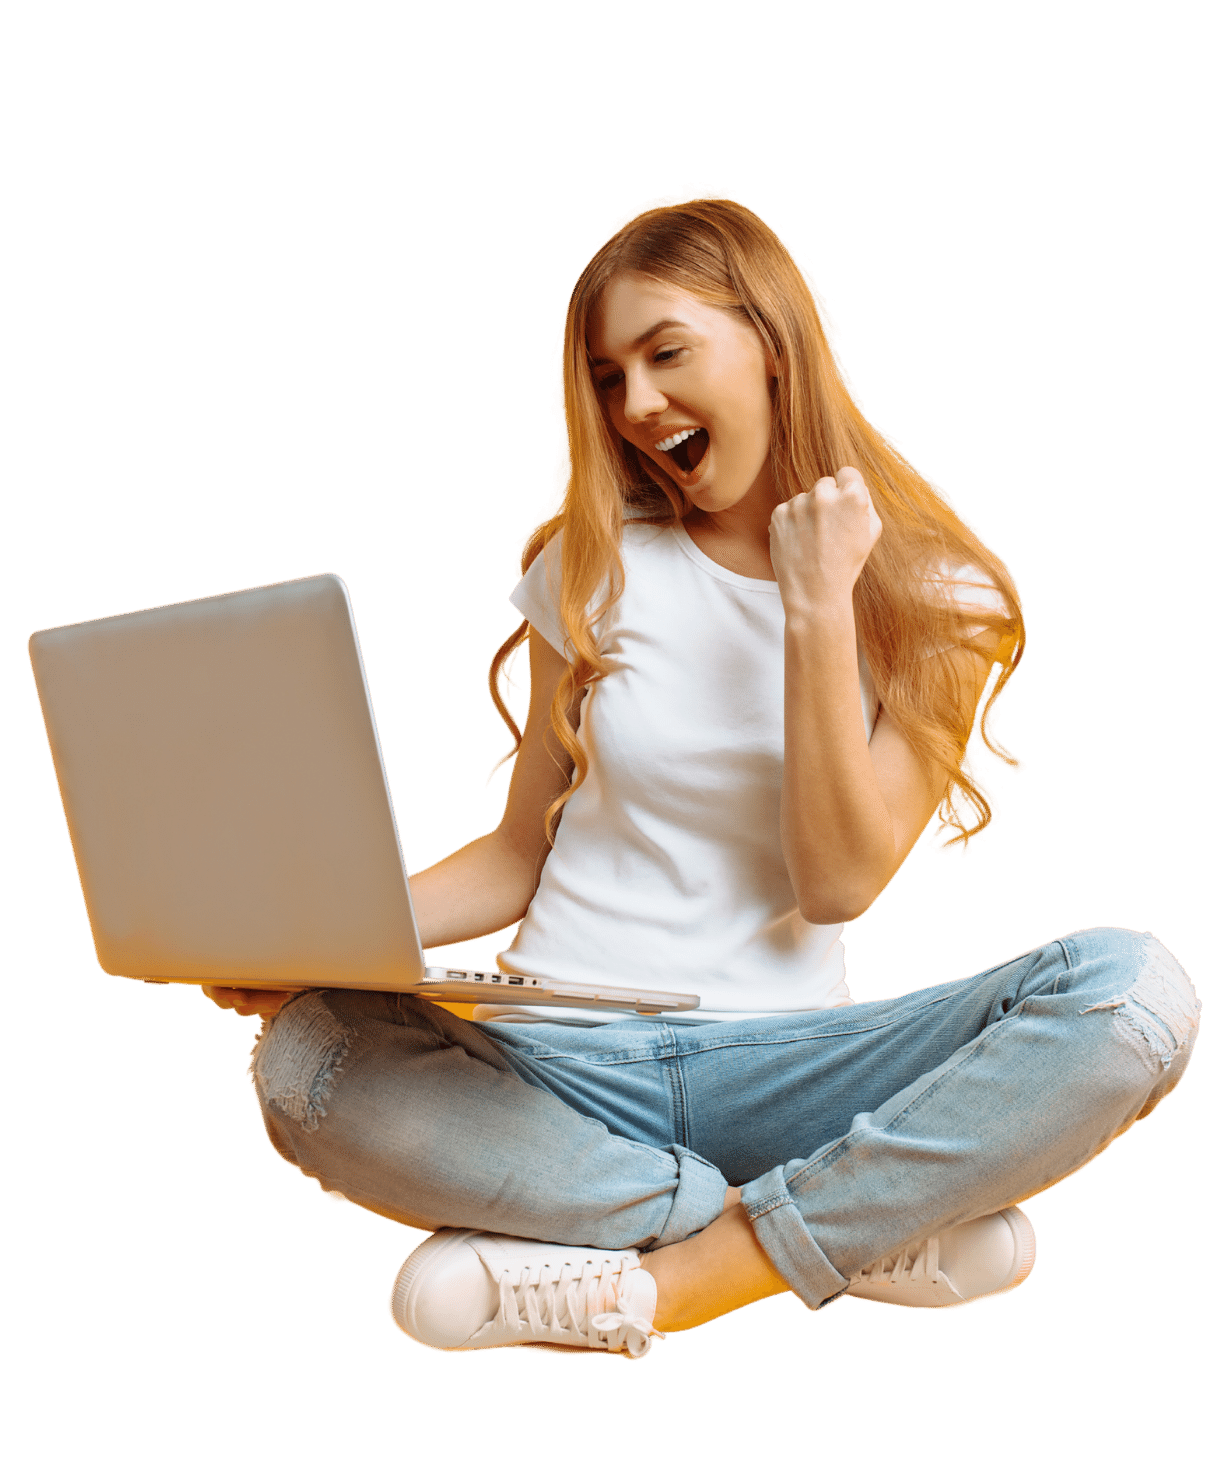 Blond girl in white shirt and blue jeans sitting crosslegged and smiling at her laptop.